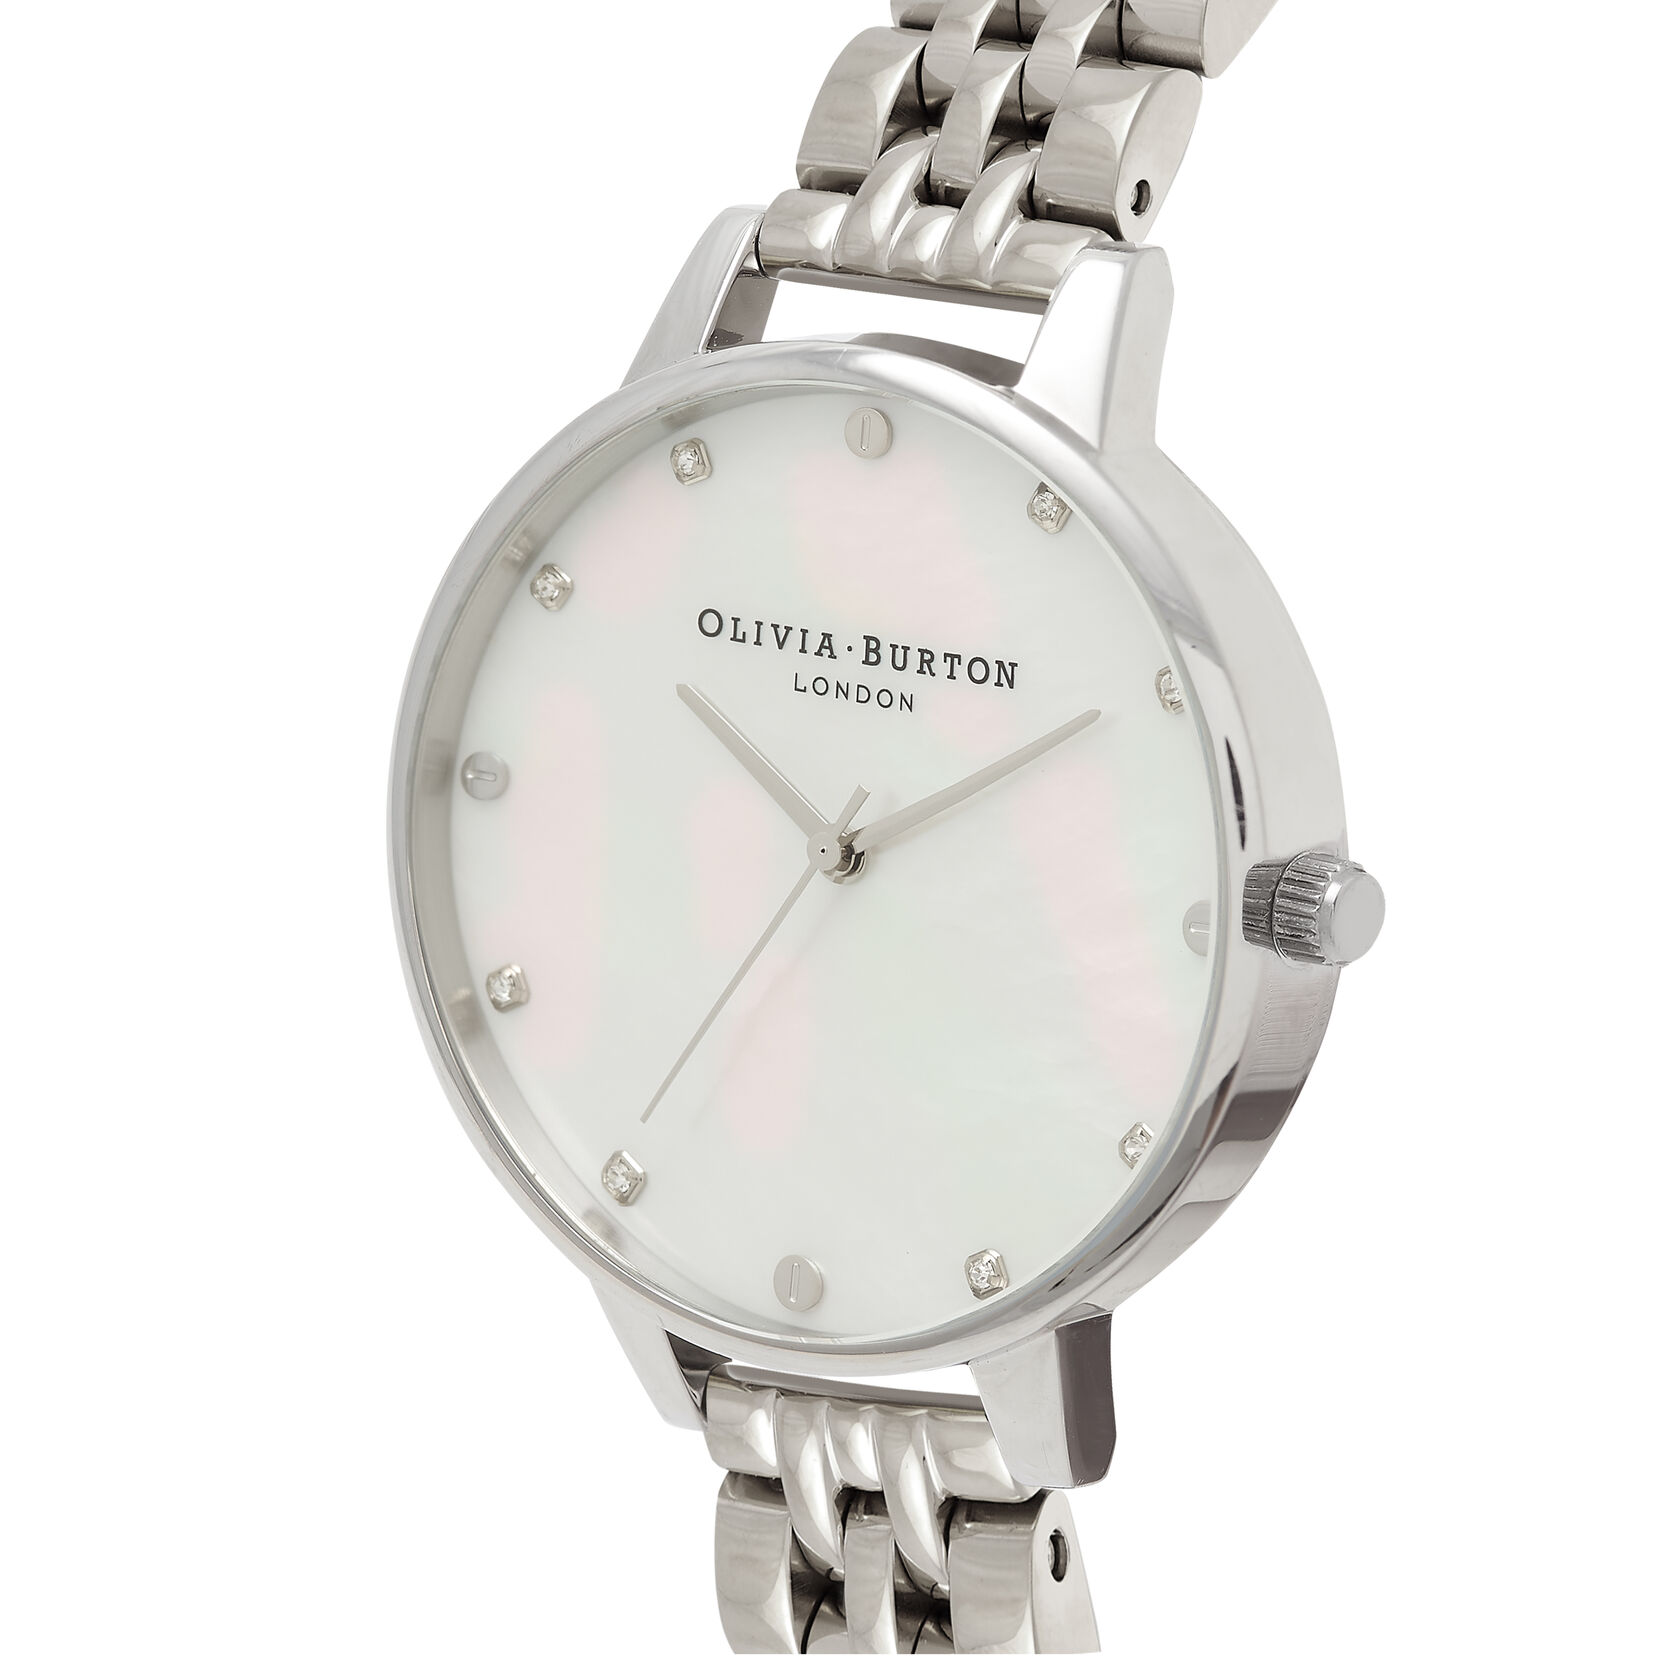 White Mother Of Pearl, Thin Case Silver Bracelet Watch